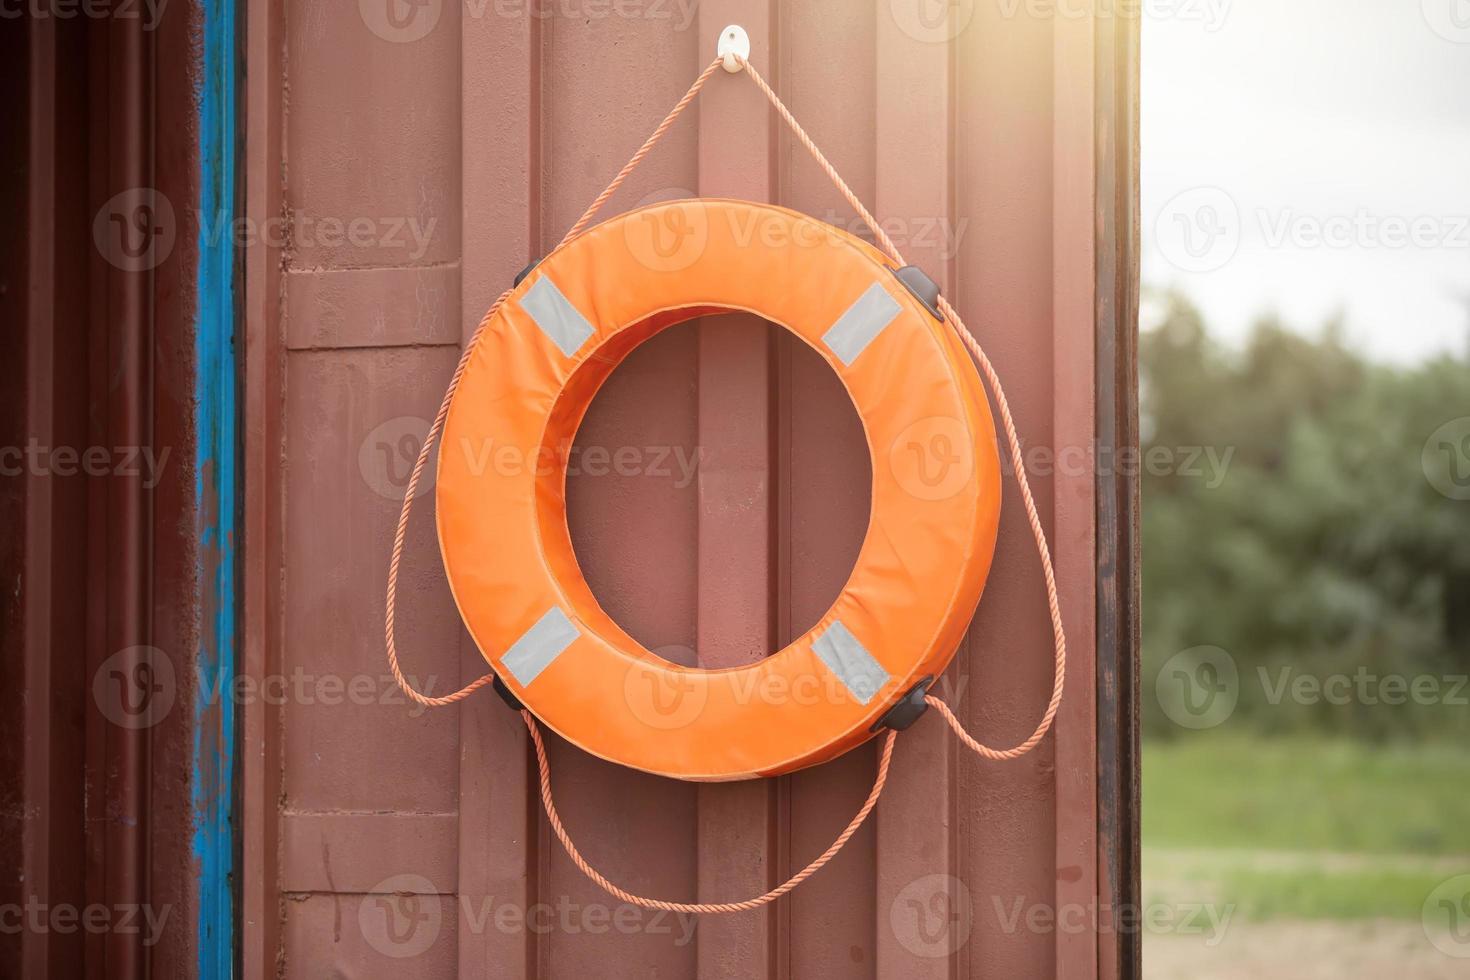 A life buoy is hanging on the door. photo